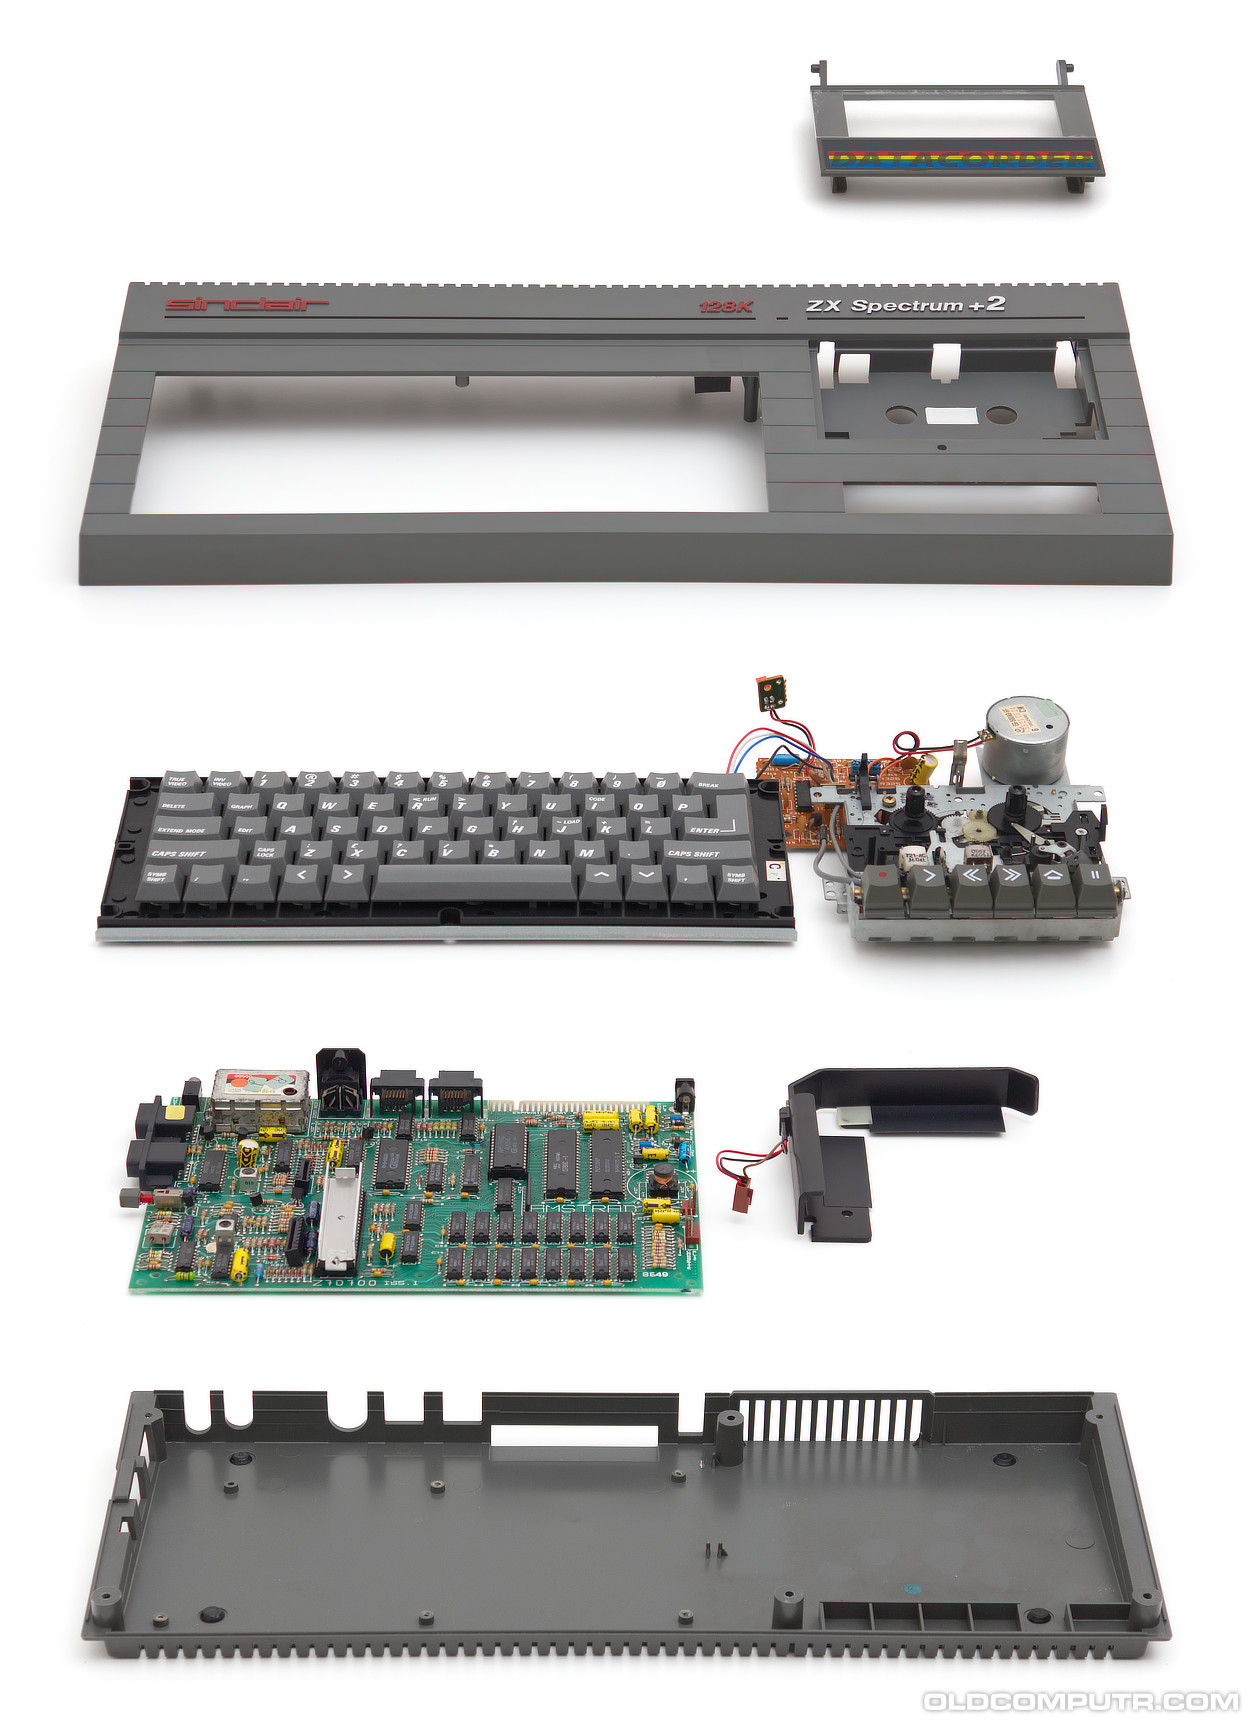 Sinclair ZX Spectrum +2 - Exploded view